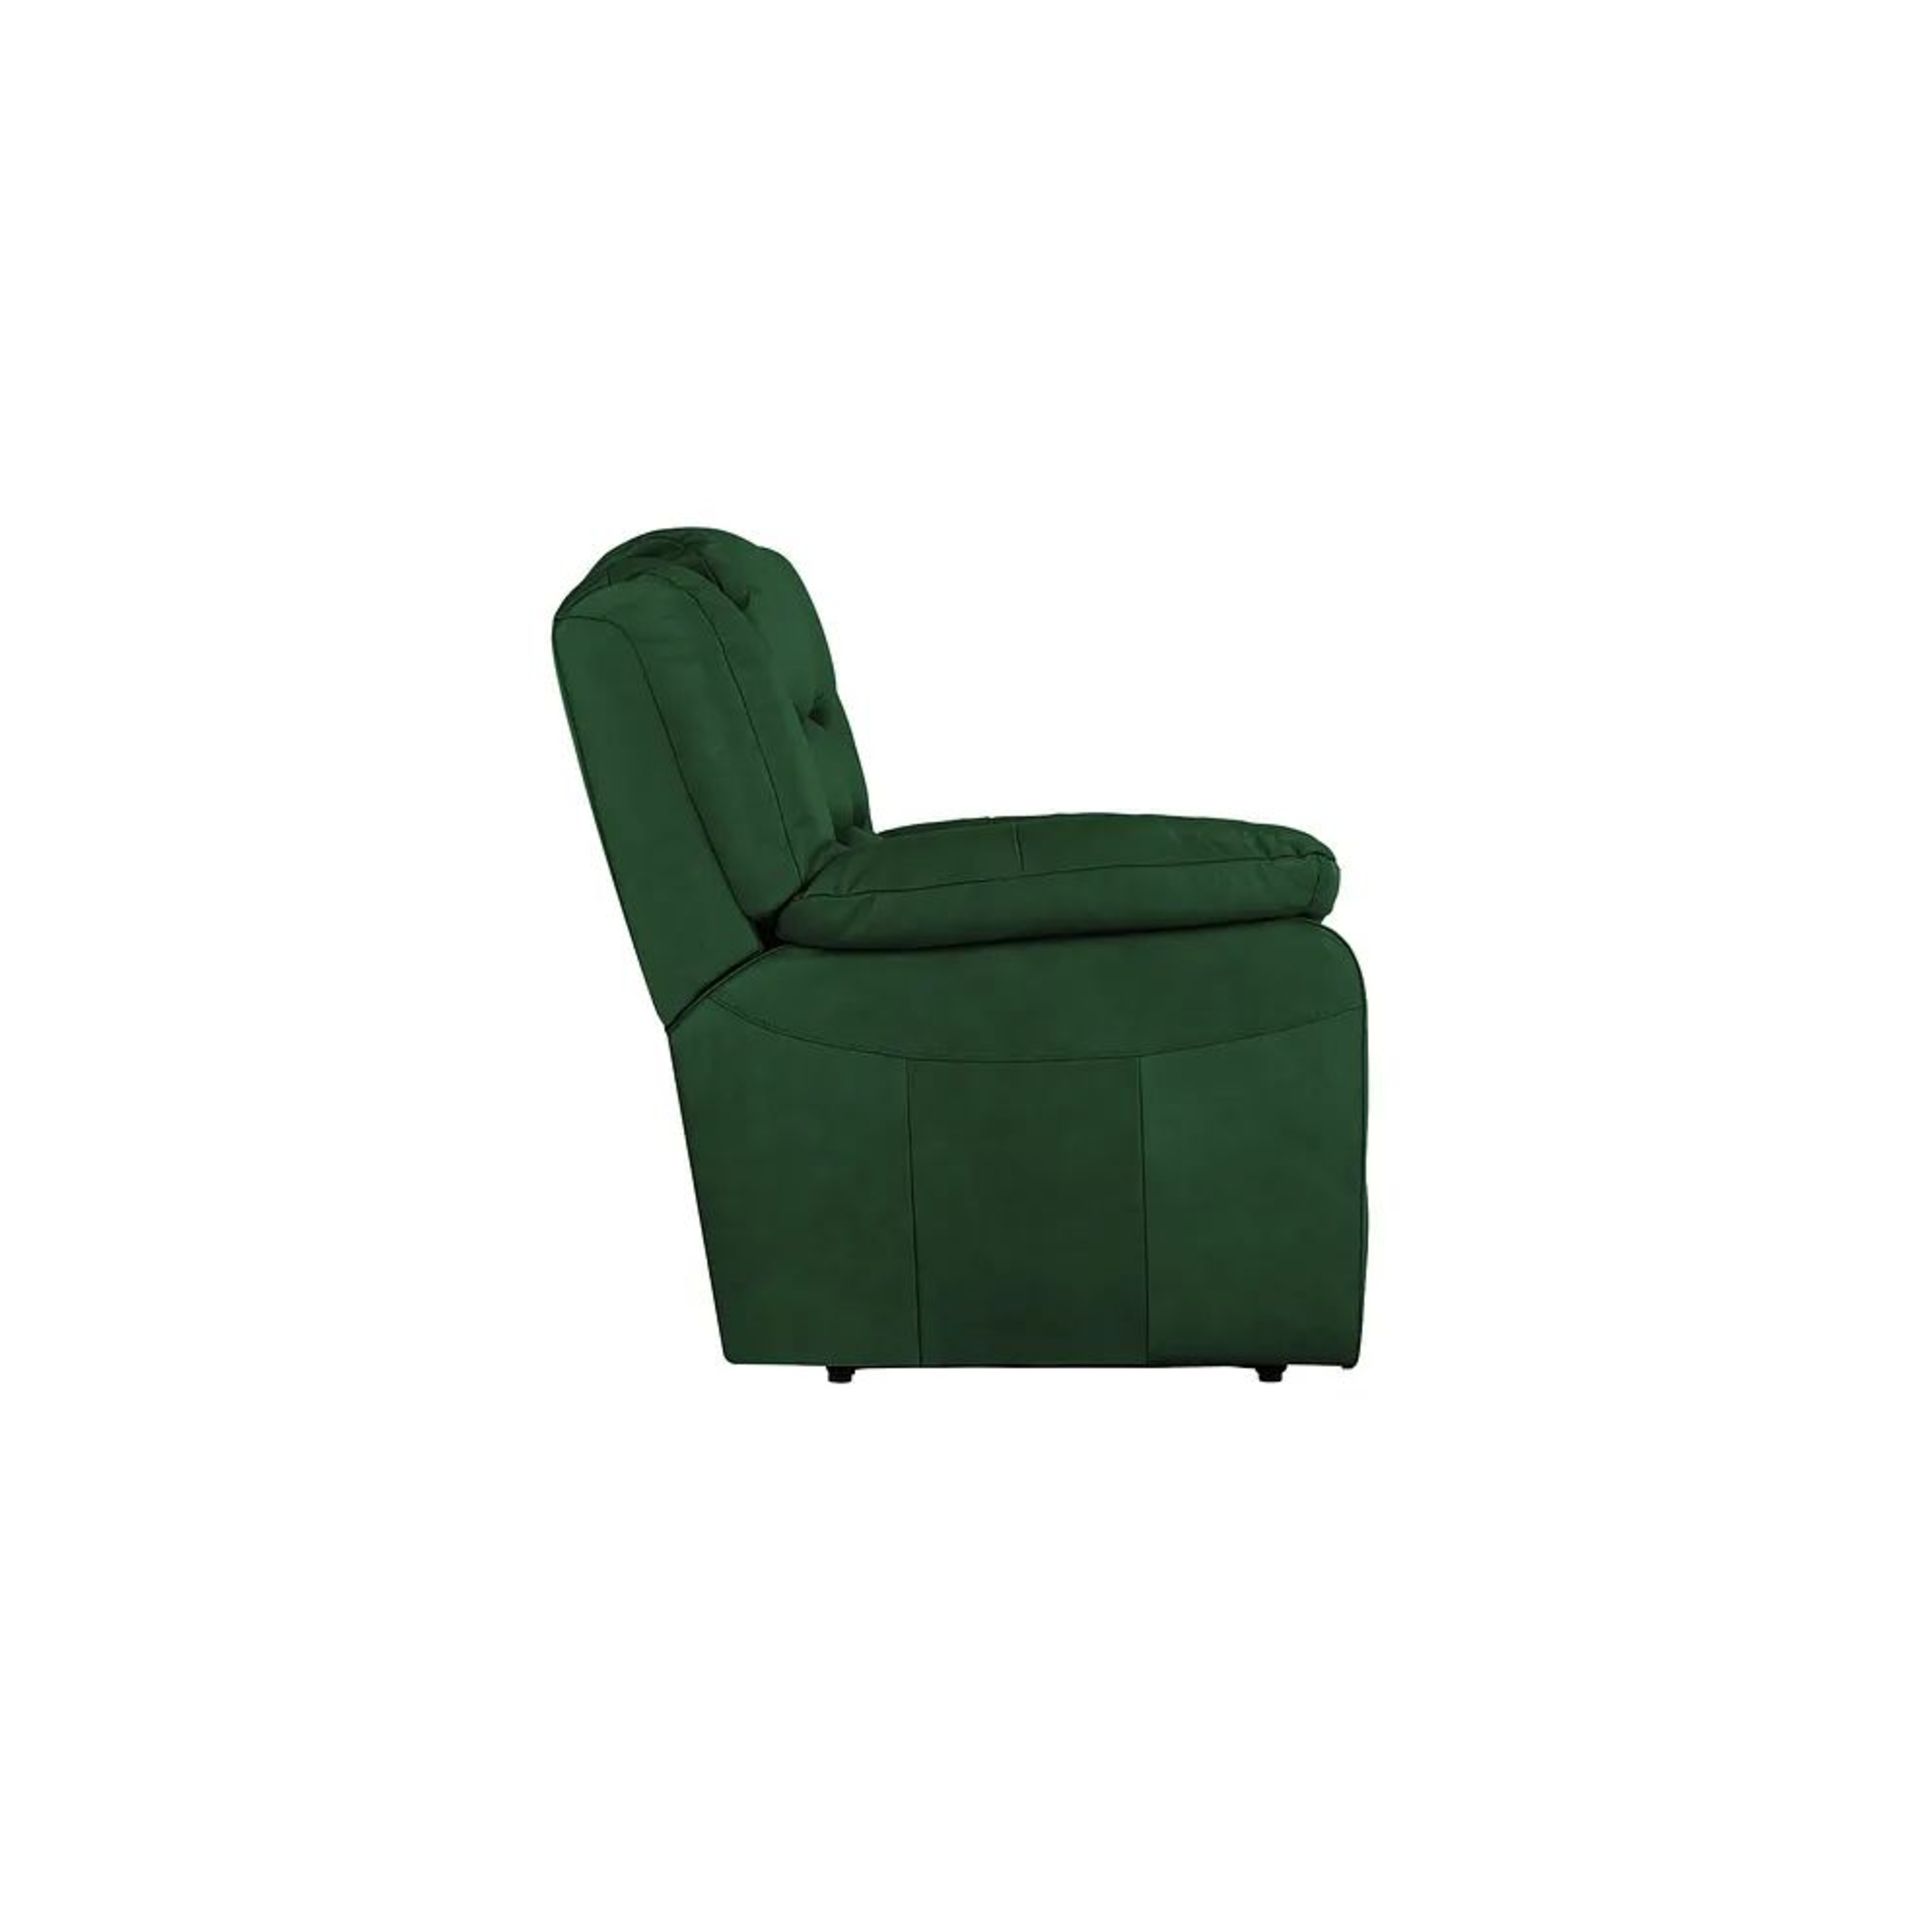 BRAND NEW MARLOW 3 Seater Sofa - GREEN LEATHER. RRP £1599. Our Marlow leather sofa range is a - Image 4 of 7